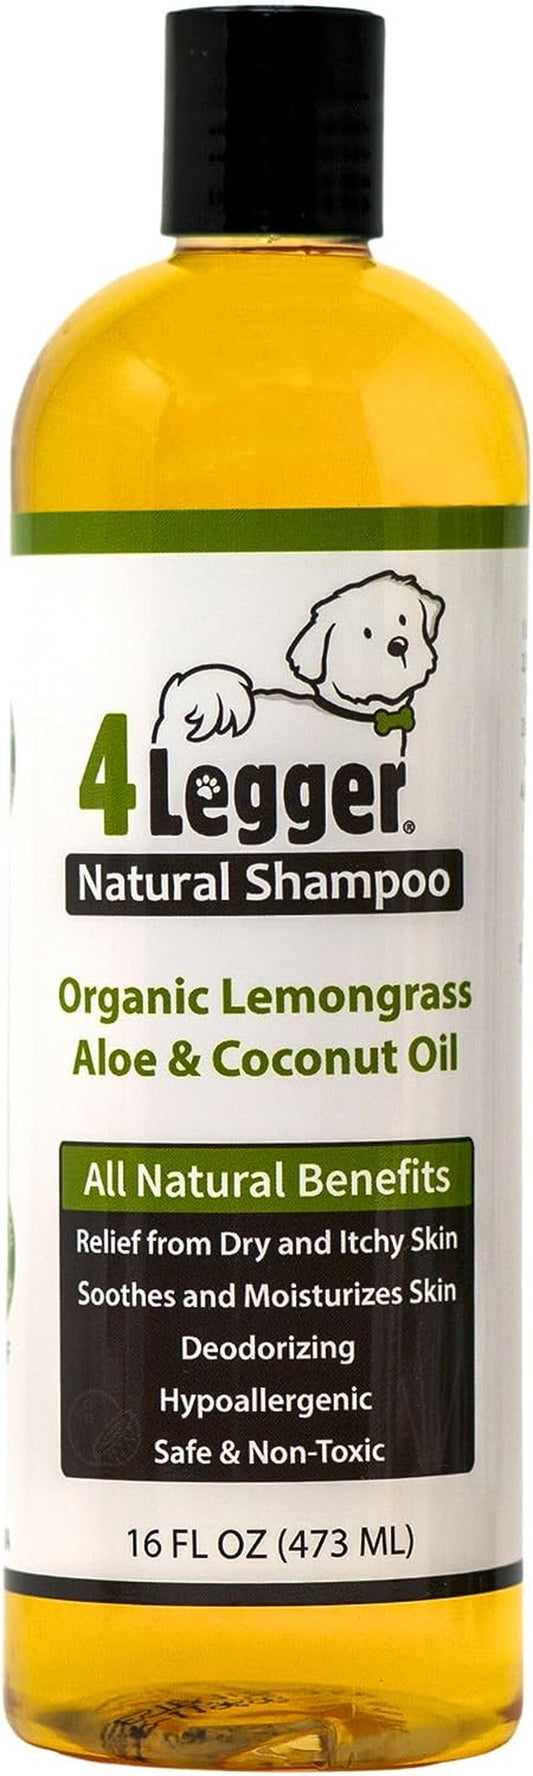 4-Legger Certified Organic Dog Shampoo - All Natural and Hypoallergenic with Aloe and Lemongrass, Soothing for Normal, Dry, Itchy or Allergy Sensitive Skin - Biodegradable - Made in USA - 16 Oz